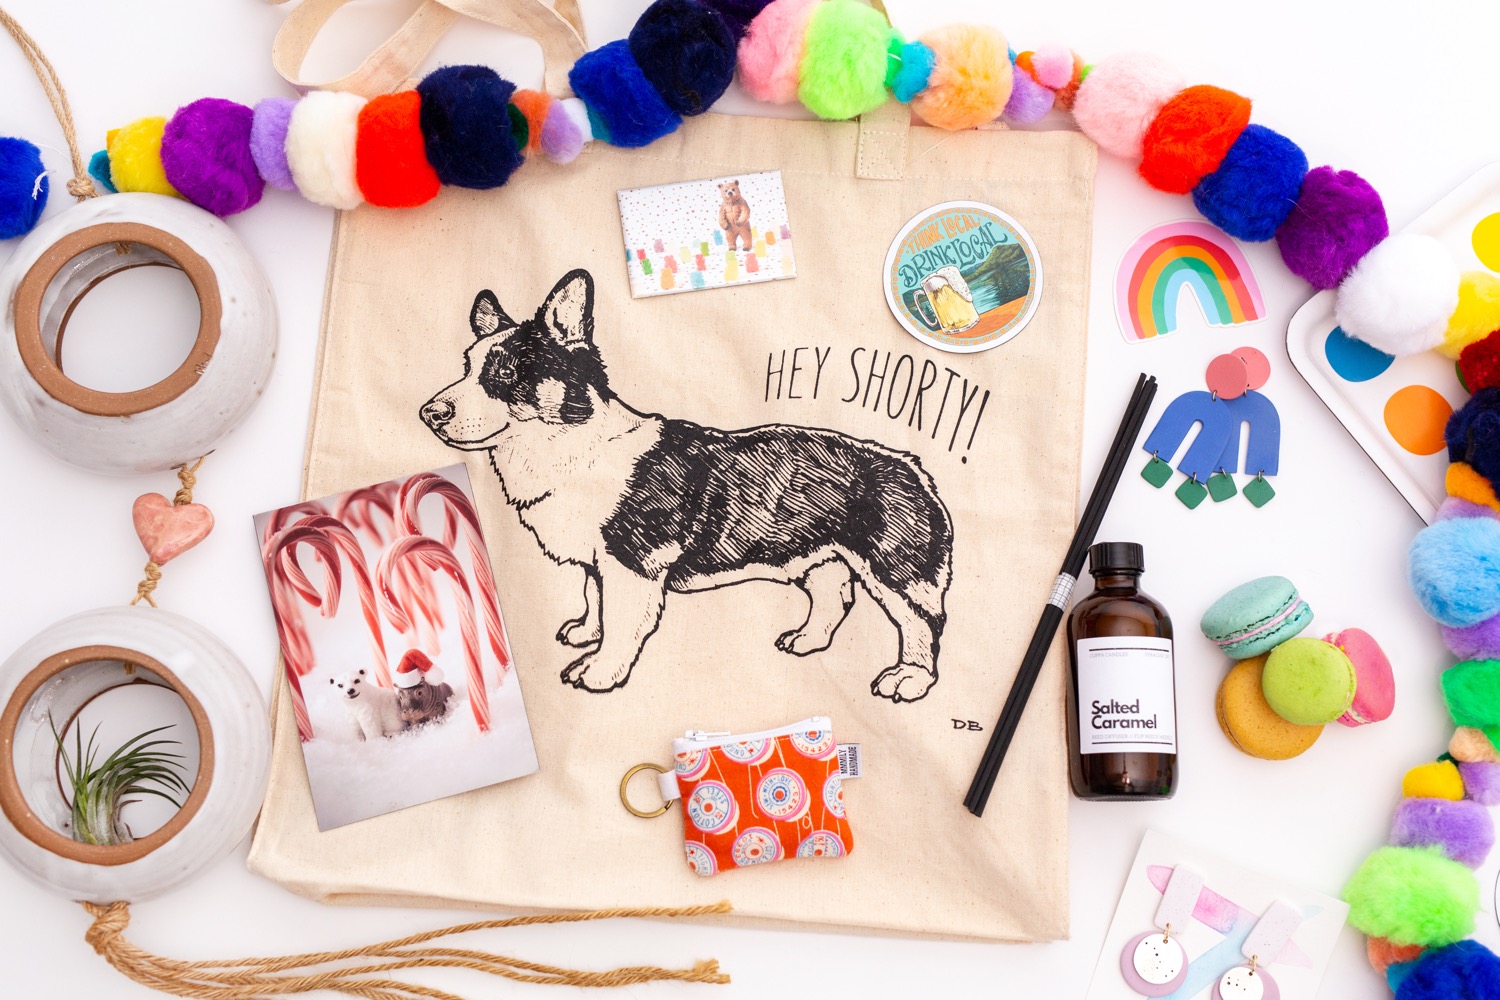 25 Handmade Gifts that are FREE (Almost)